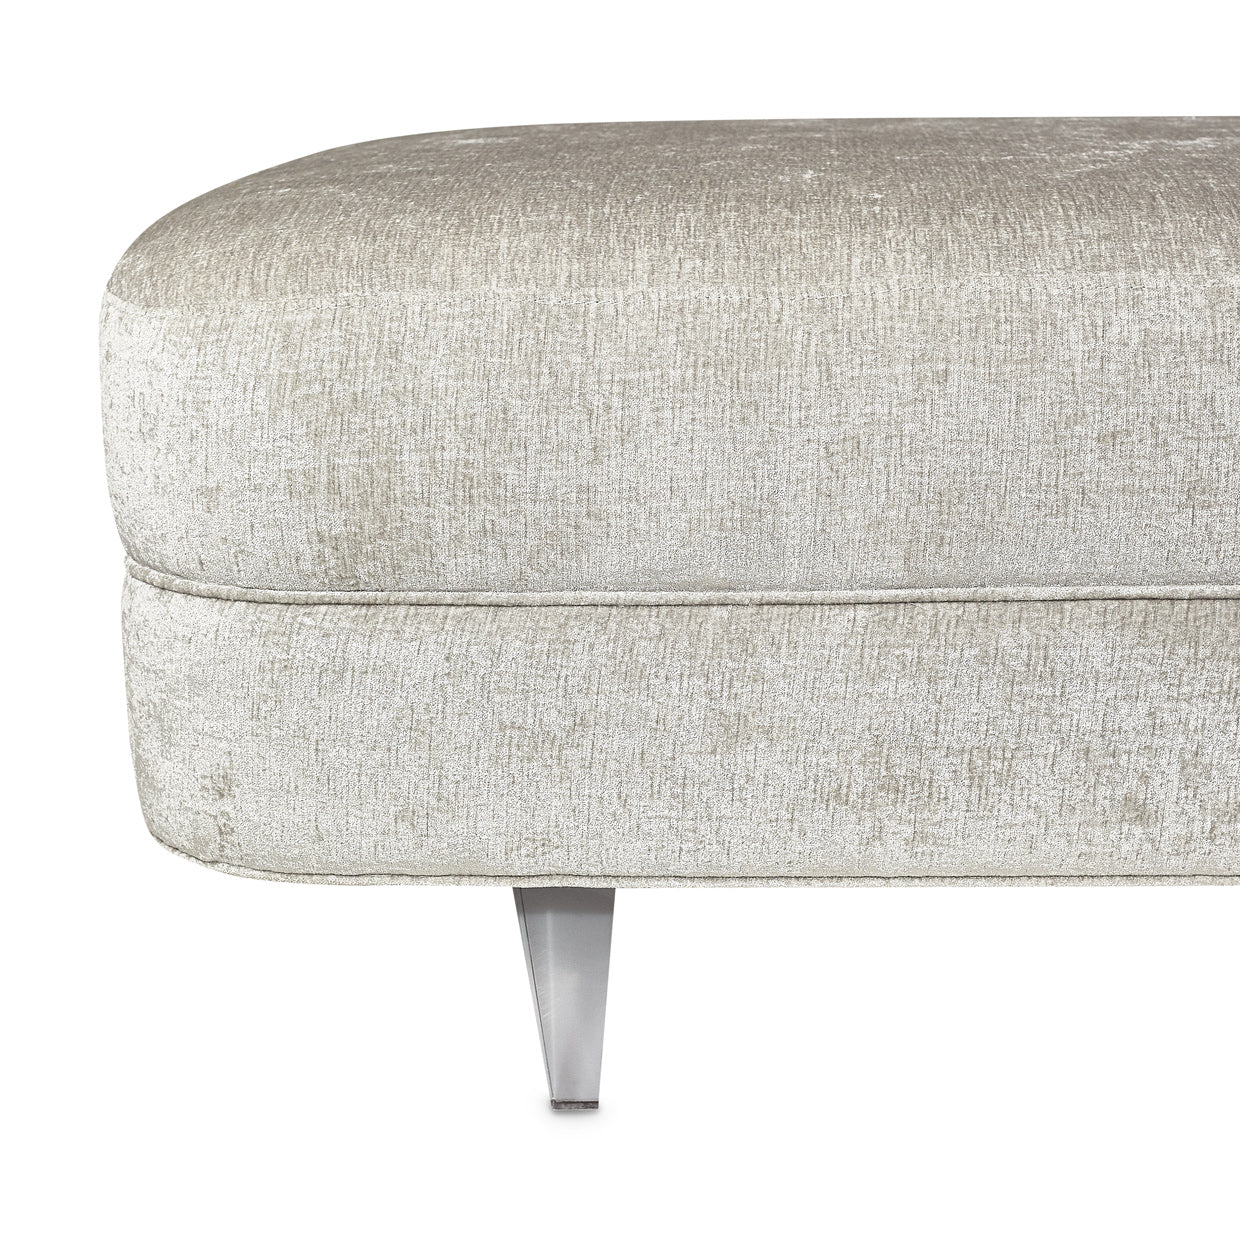 Lanna Chaise, Tailored details, Soft neutrals, Chenille fabric, Luxury cushions, Velvet, honeycomb pattern, Everyday lounging, Home style, dream art, Michael amini 